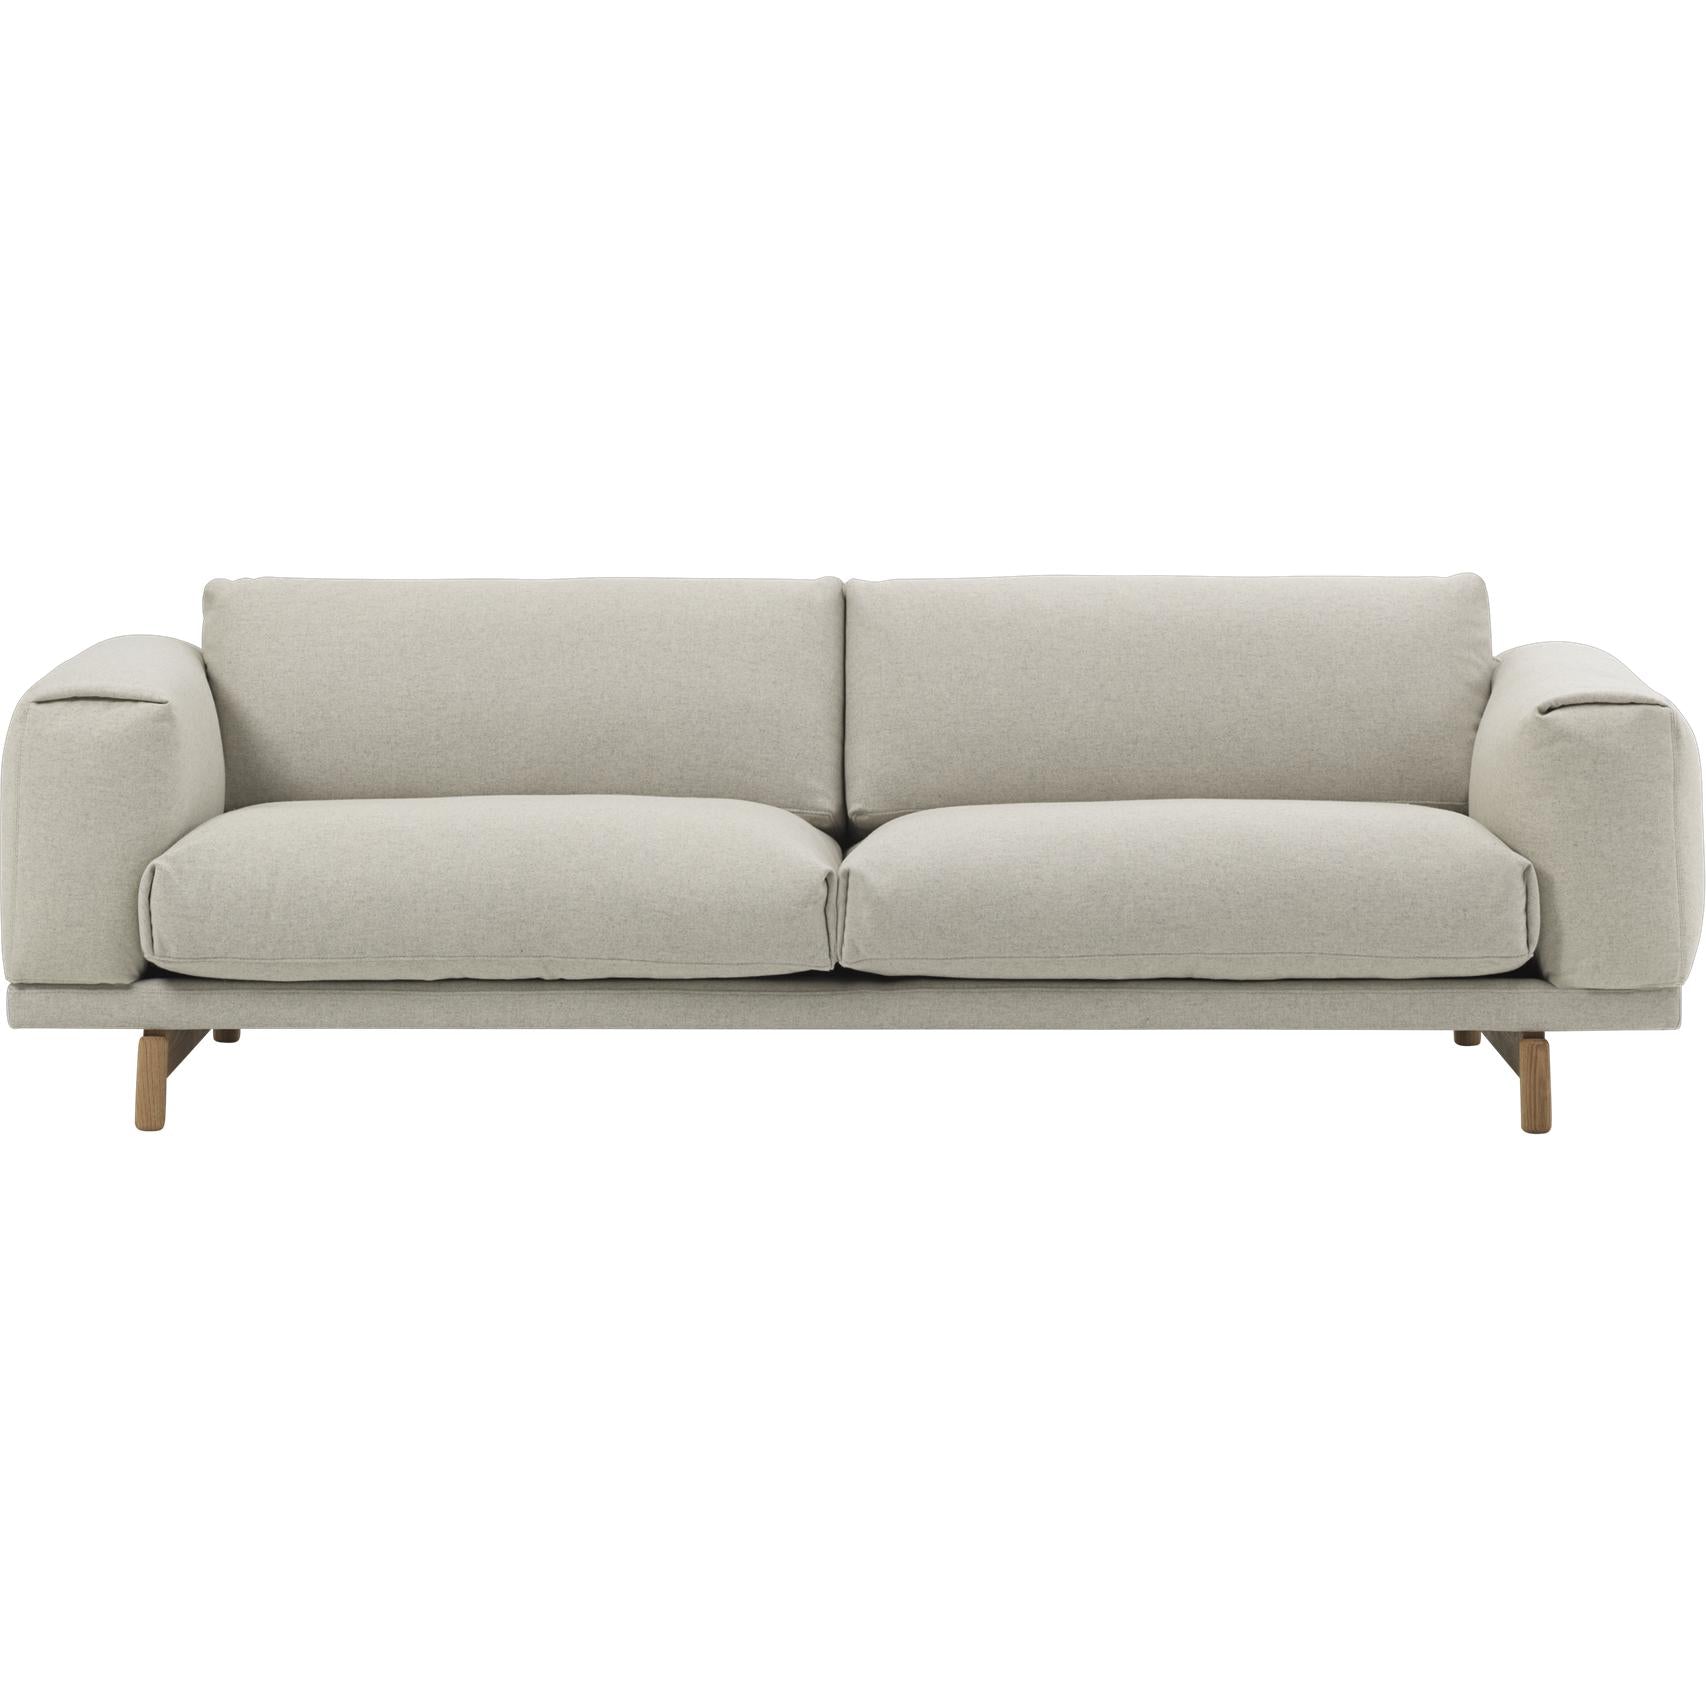 Muuto Rest Sofa 3 Persons, Fabric, Wooly 2256